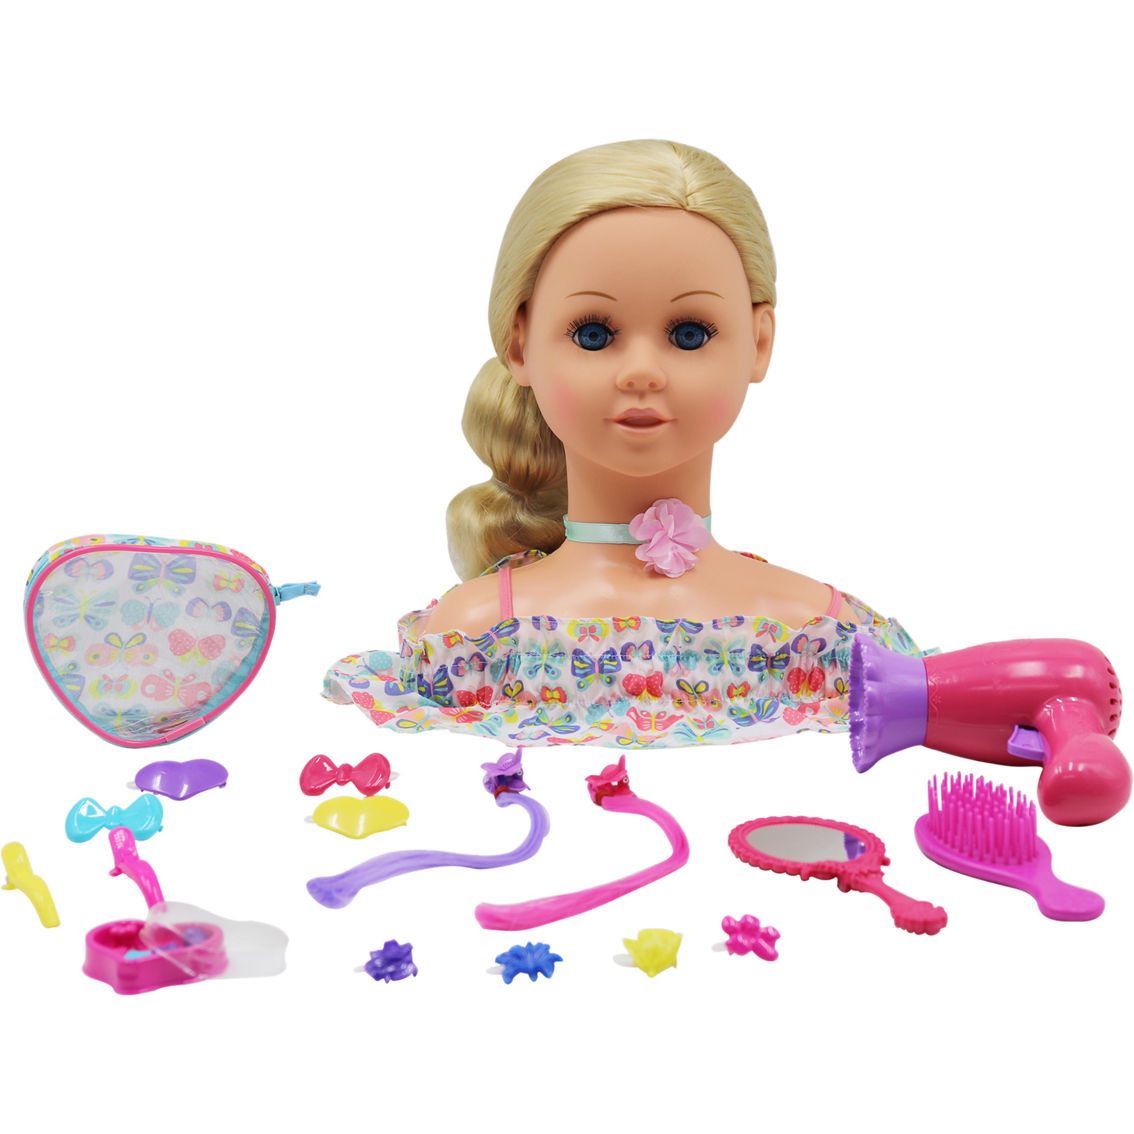 Dream Collection Hair Styling Set Doll Head Hair & Makeup Playset, Dolls, Baby & Toys